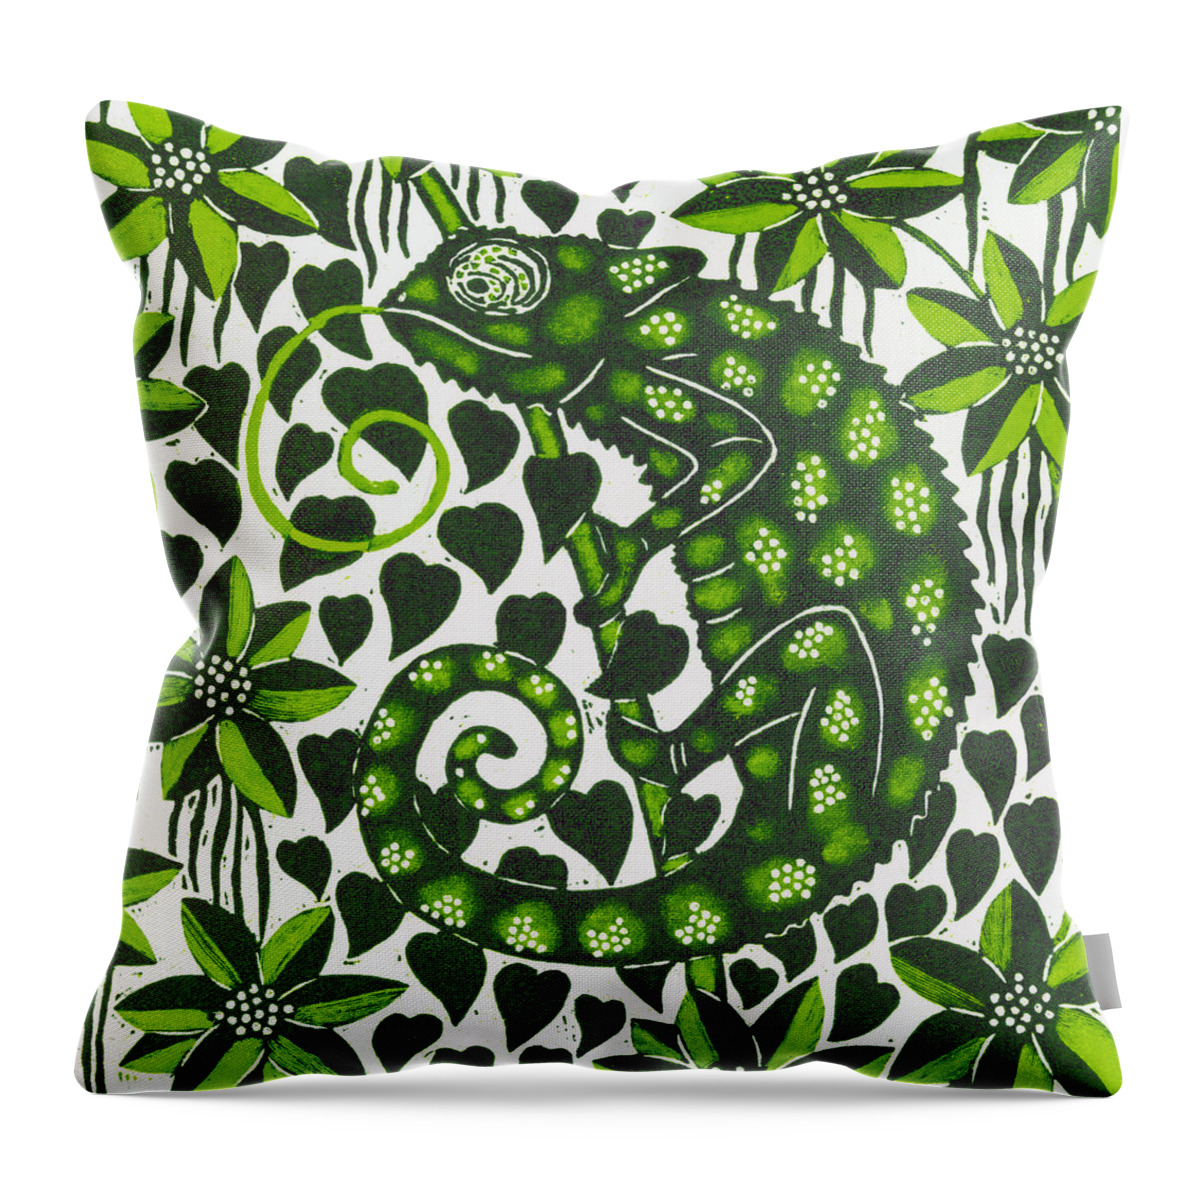 Chameleon Throw Pillow featuring the painting Chameleon by Nat Morley